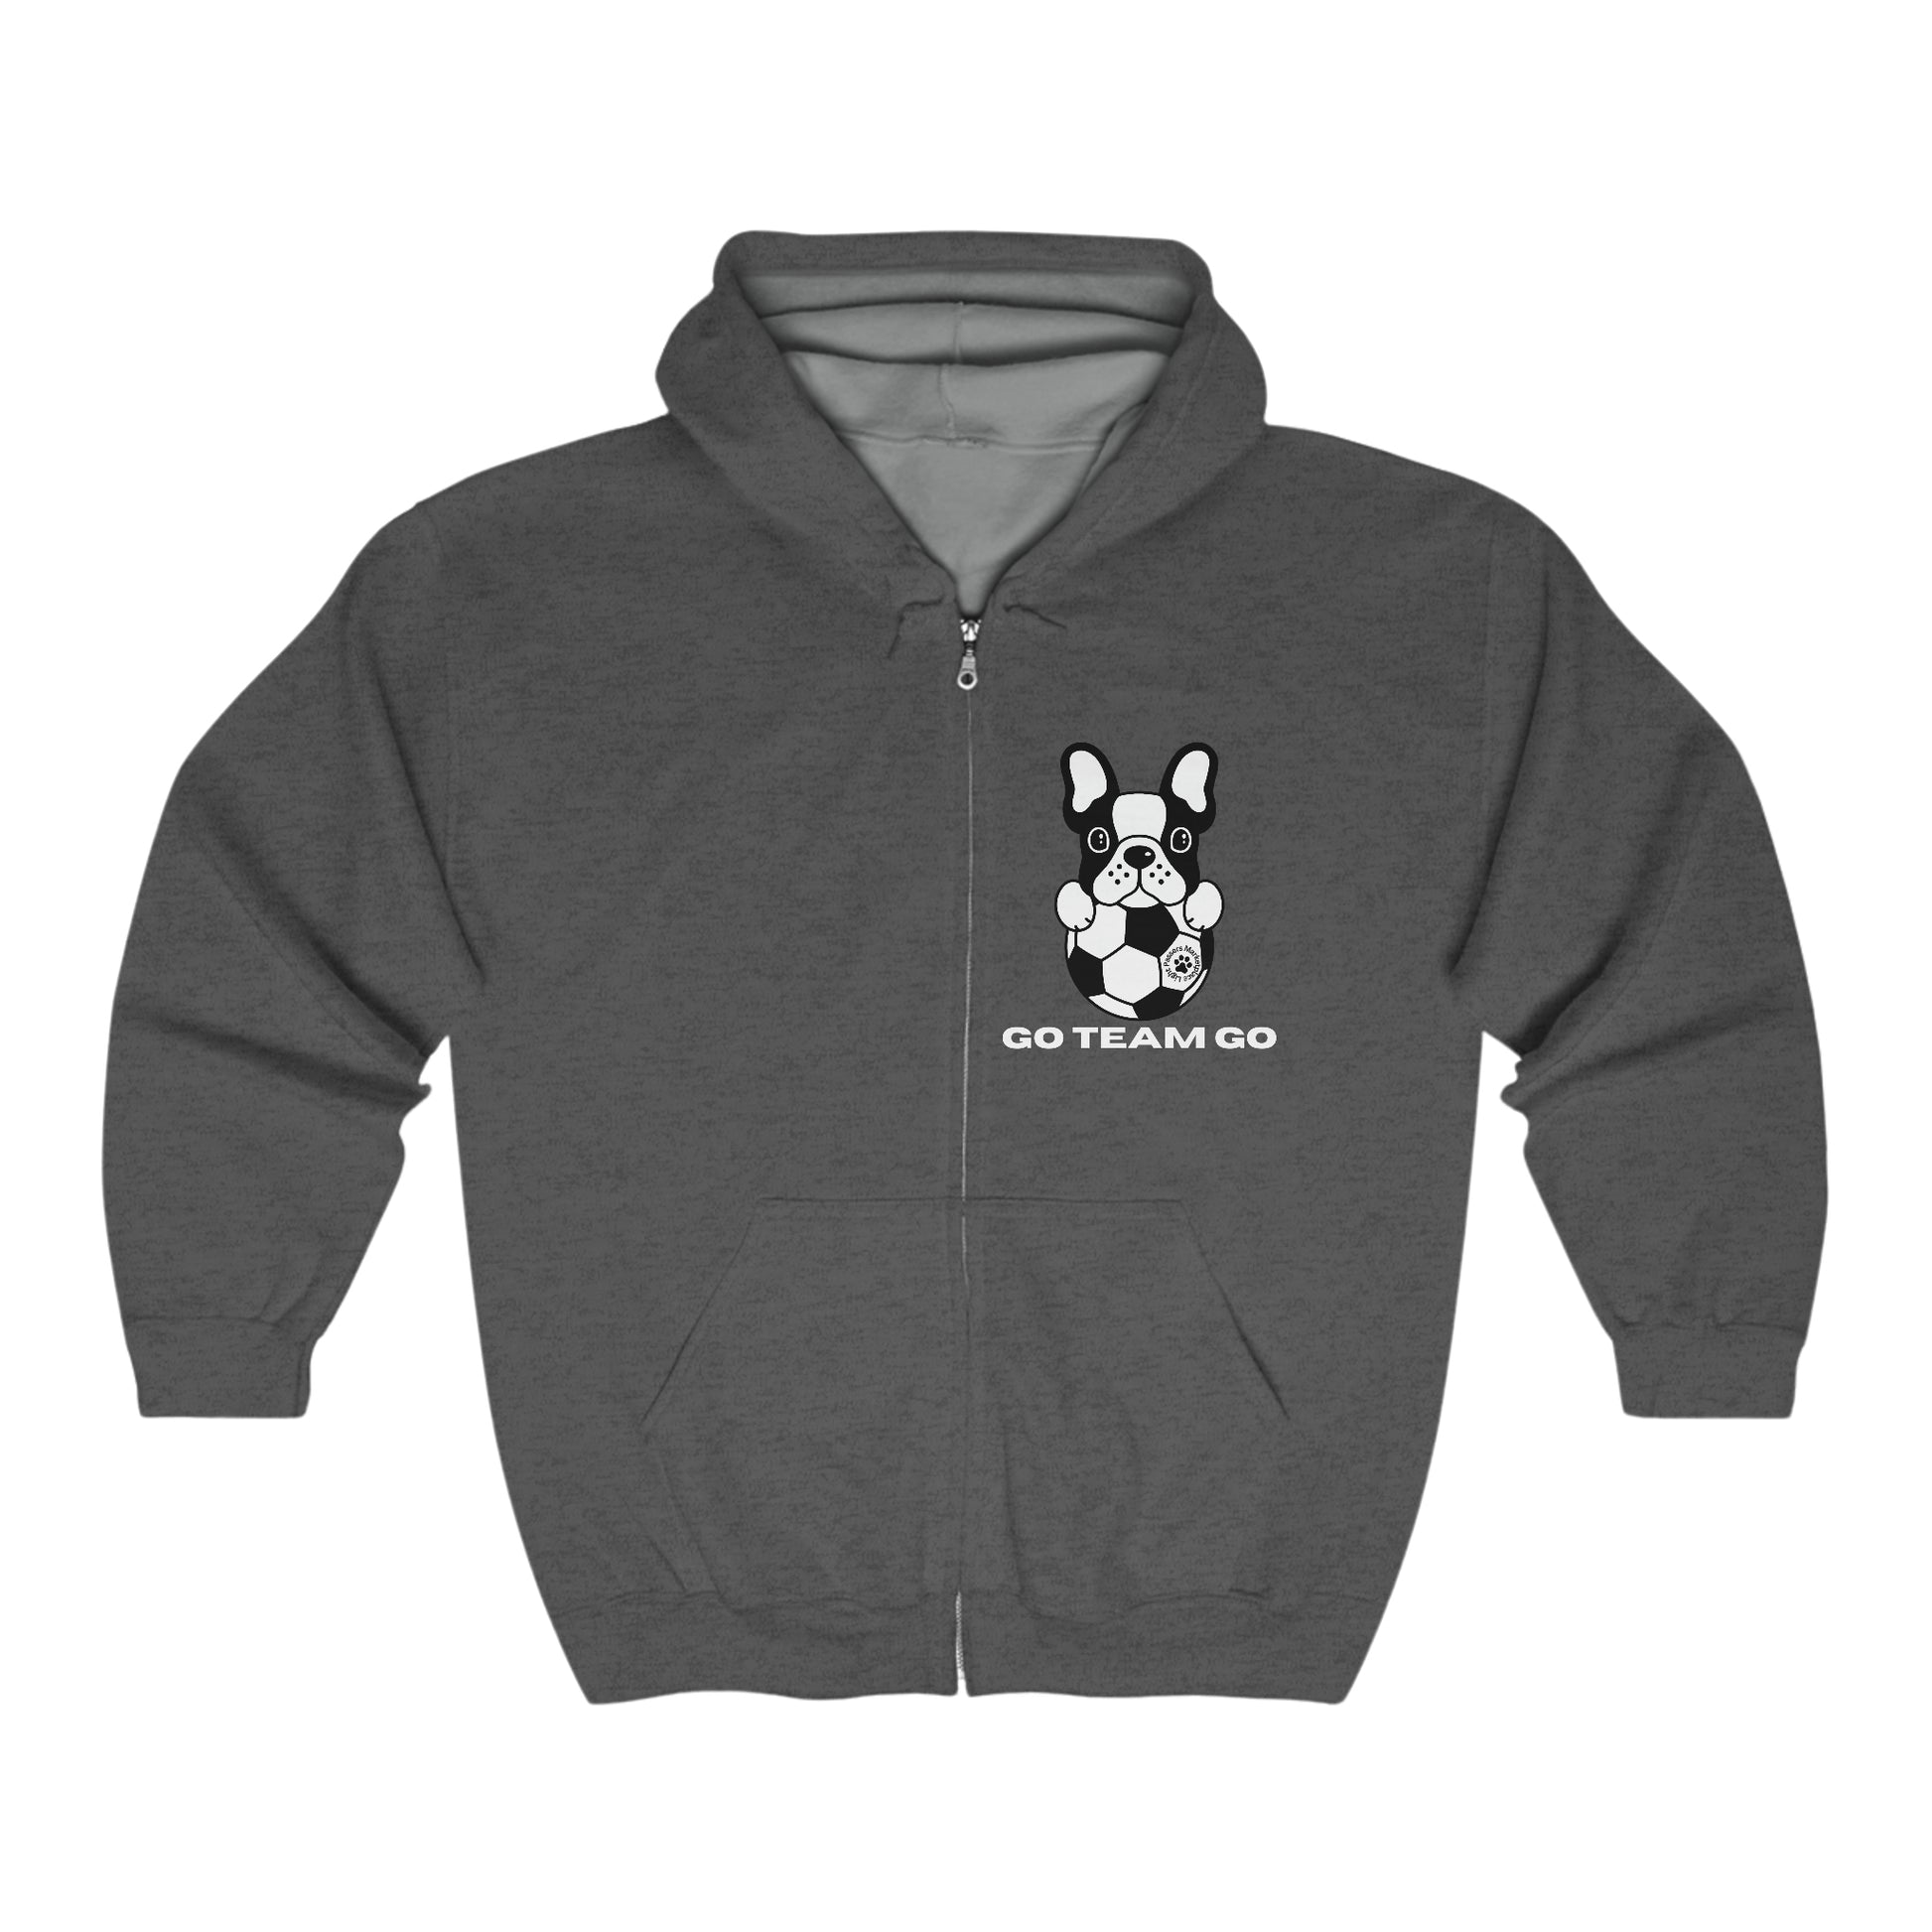 A classic Soccer Dog Unisex Full Zip Hooded Sweatshirt in grey, featuring a dog and football ball design. Soft fleece, reduced pilling, 50% cotton, 50% polyester blend, medium-heavy fabric, classic fit.